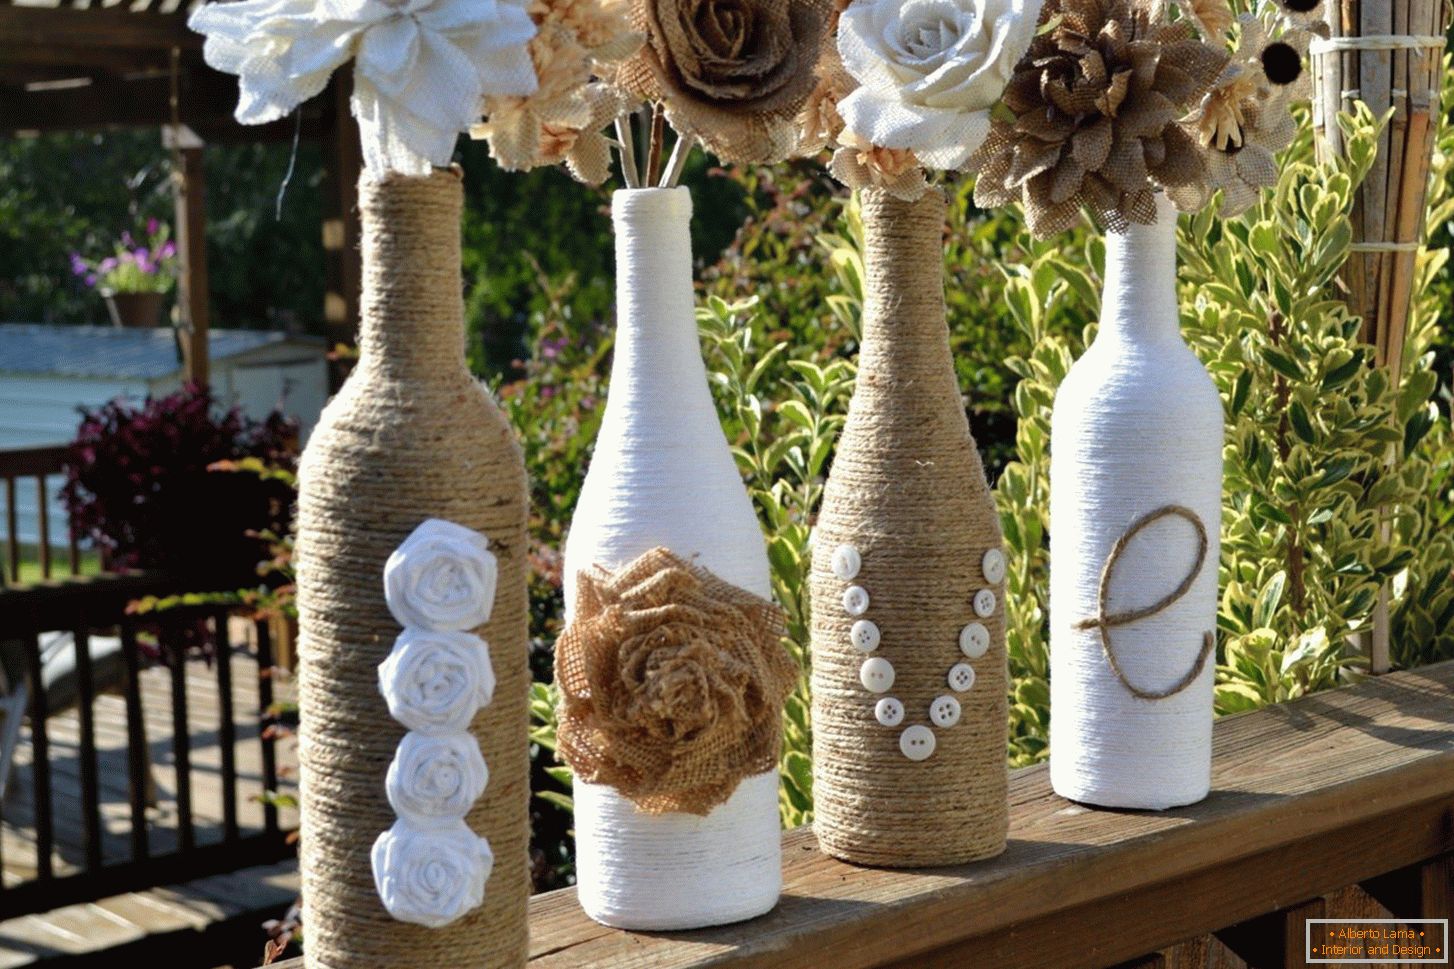 Bottles with flowers